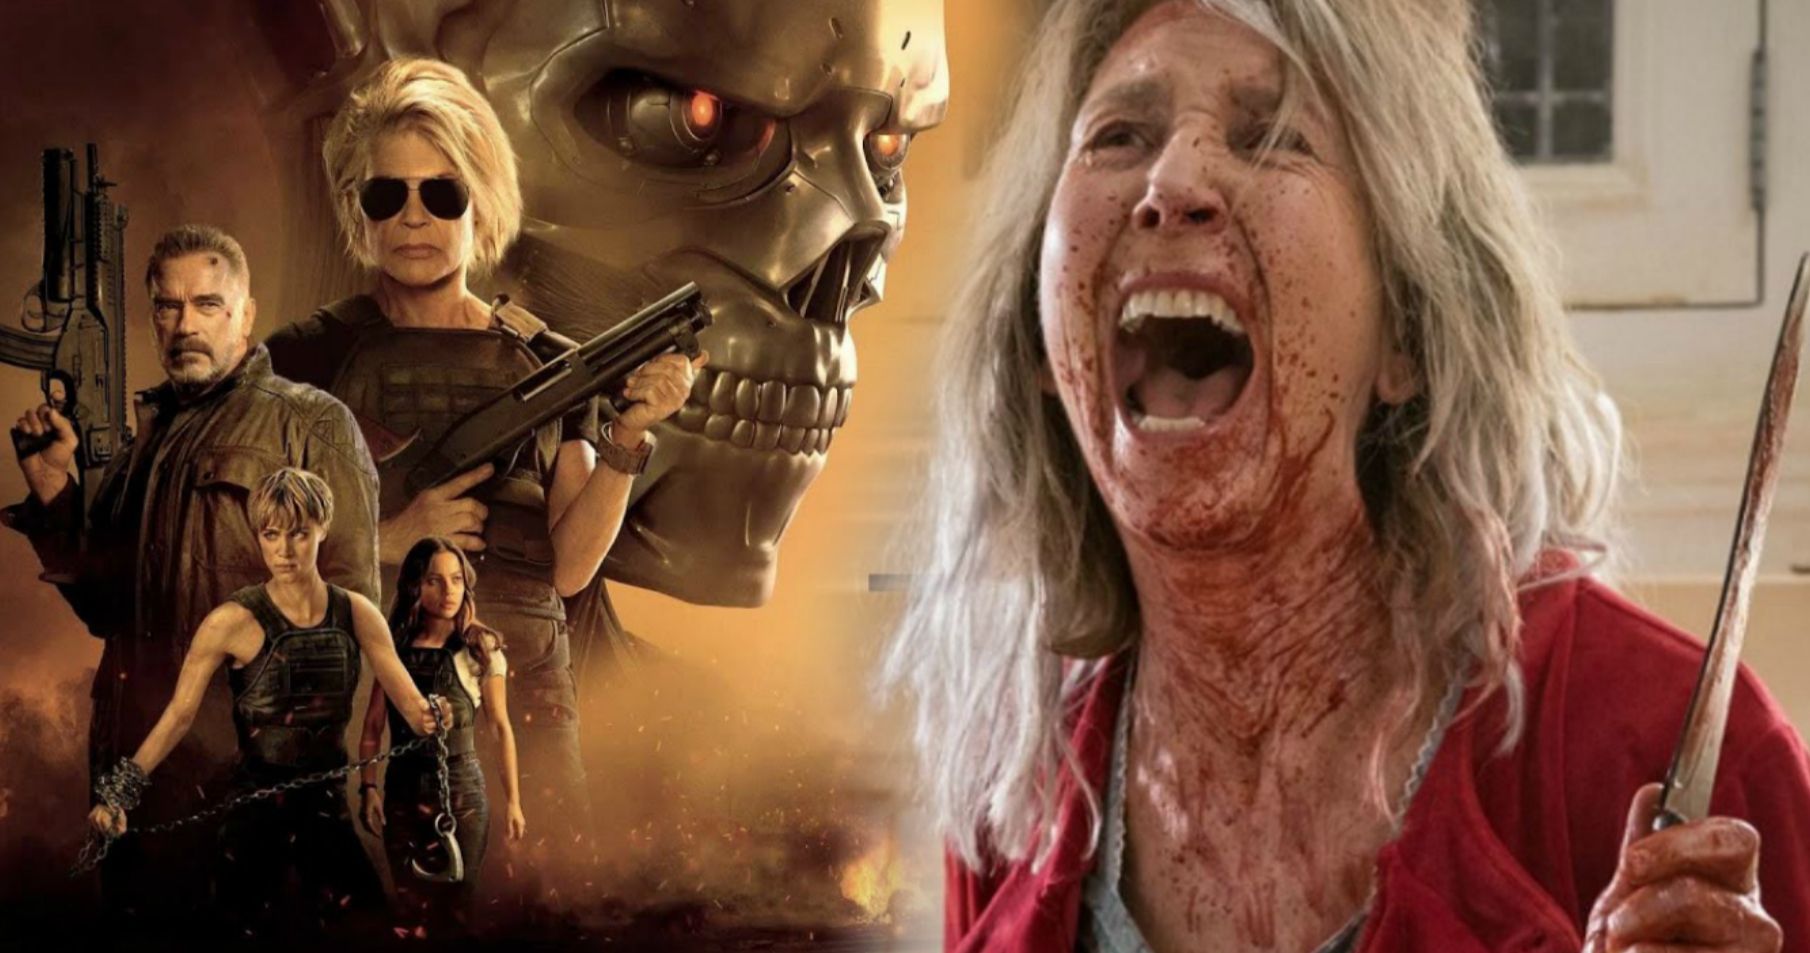 Terminator: Dark Fate &amp; The Grudge Reboot Are Both Rated-R, Here's Why